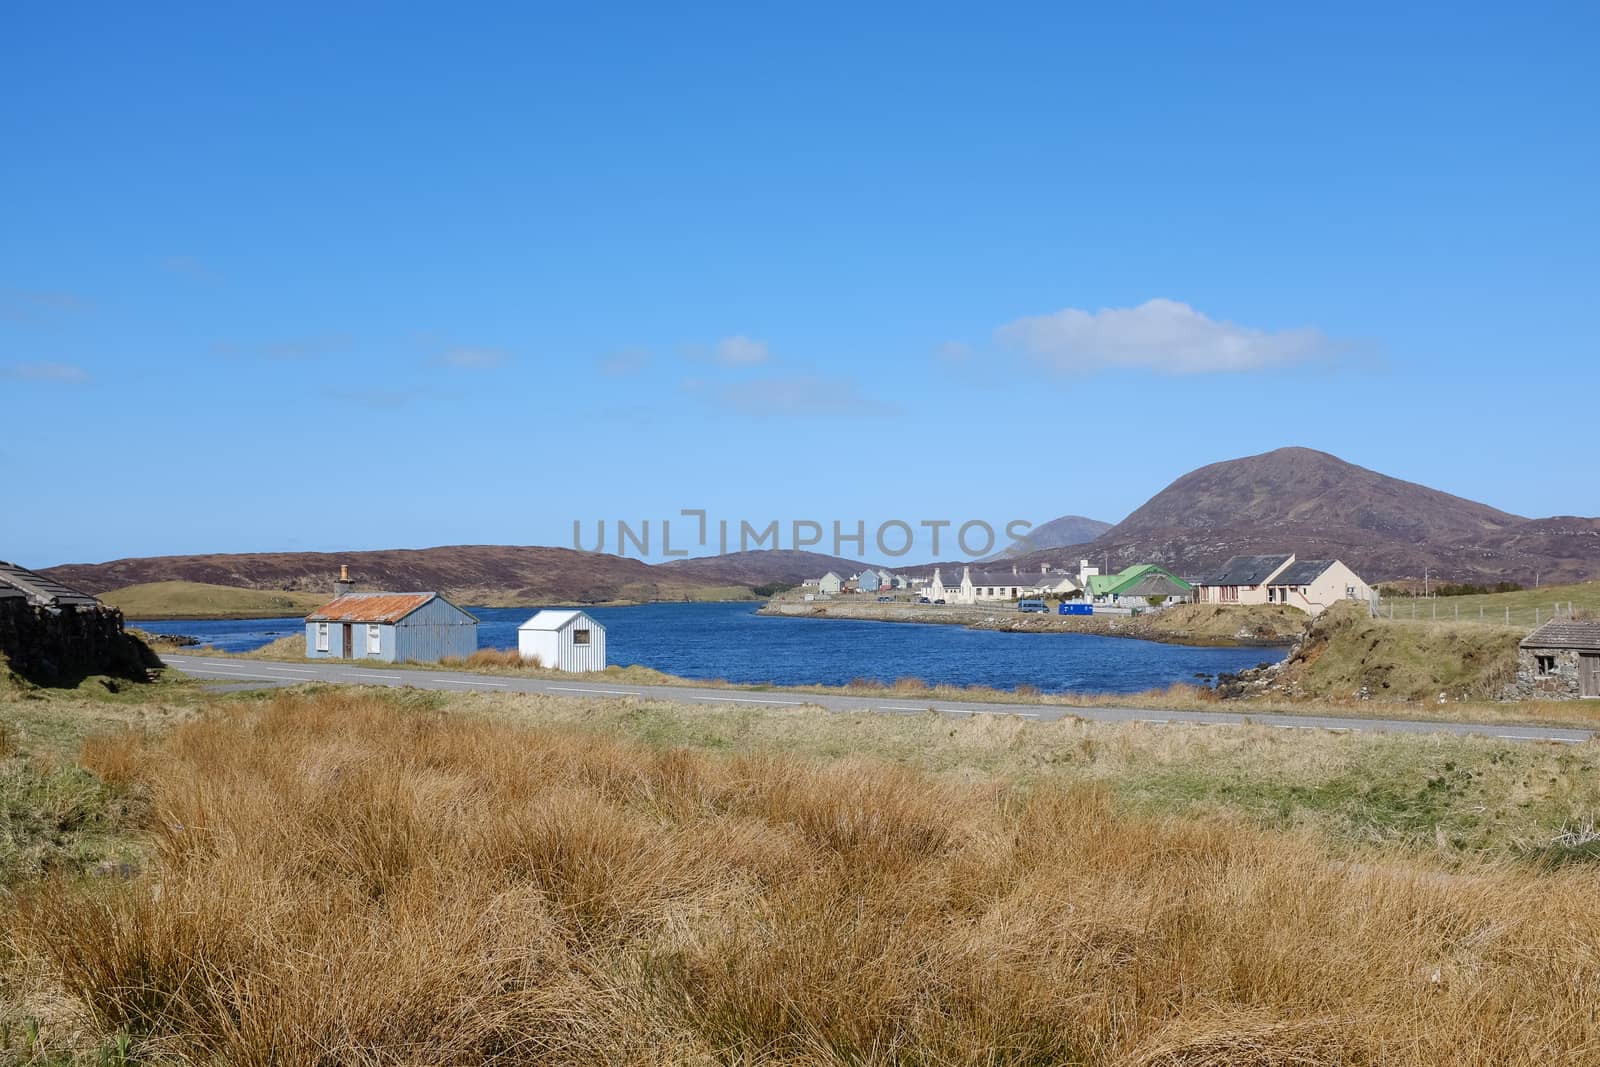 Grasses lead to tin huts overlooking a small loch with the village of Leverburgh, Isle of Harris, Scotland, UK.